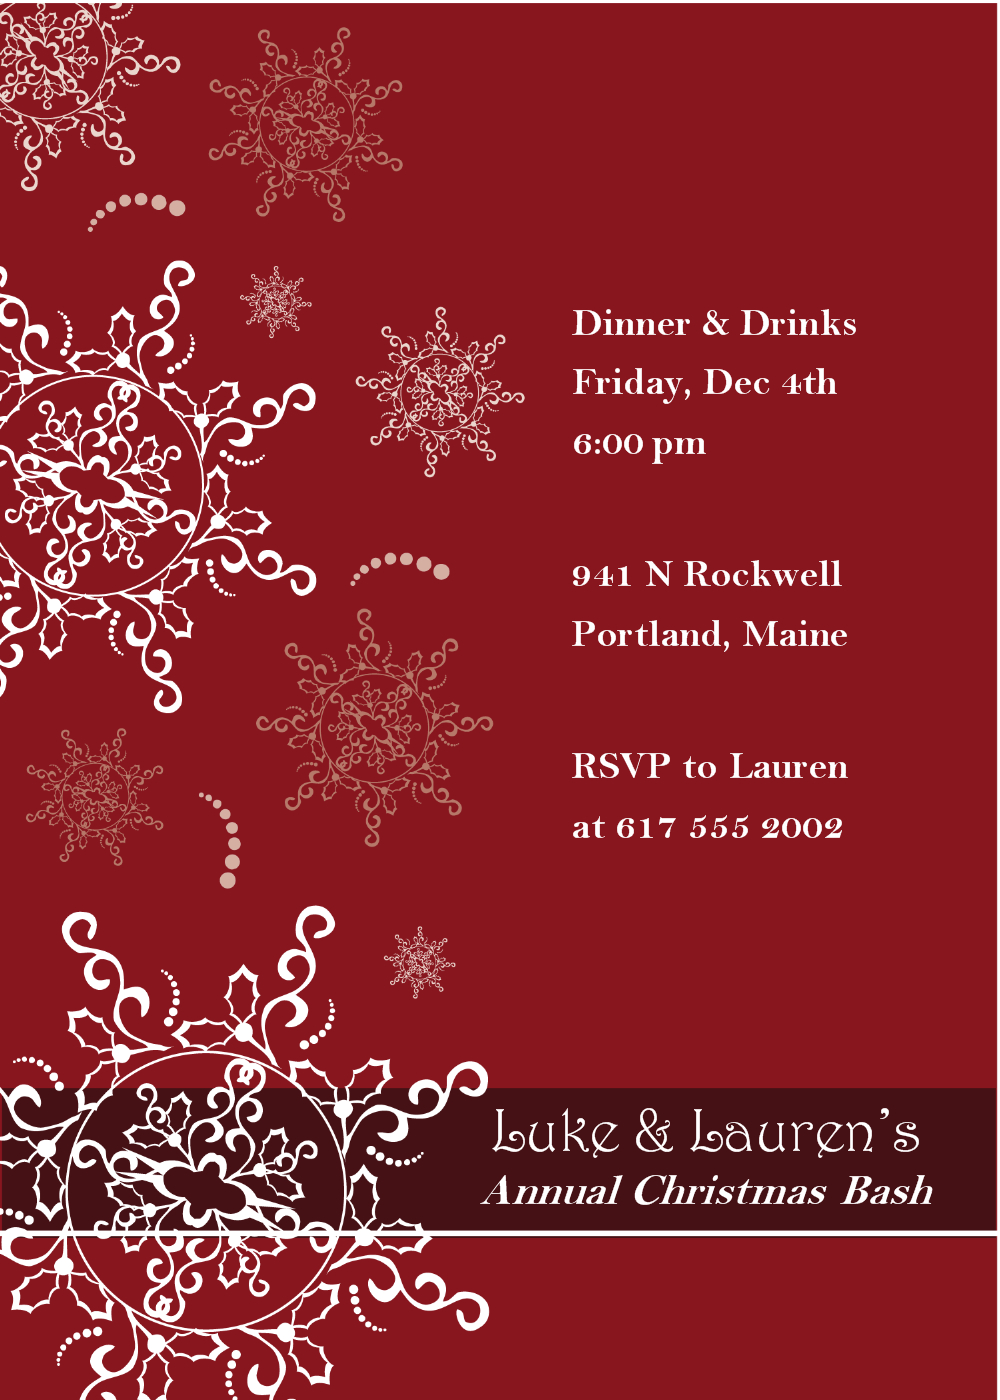 Christmas Party Invitation Templates Free Word Regarding Free Dinner Invitation Templates For Word